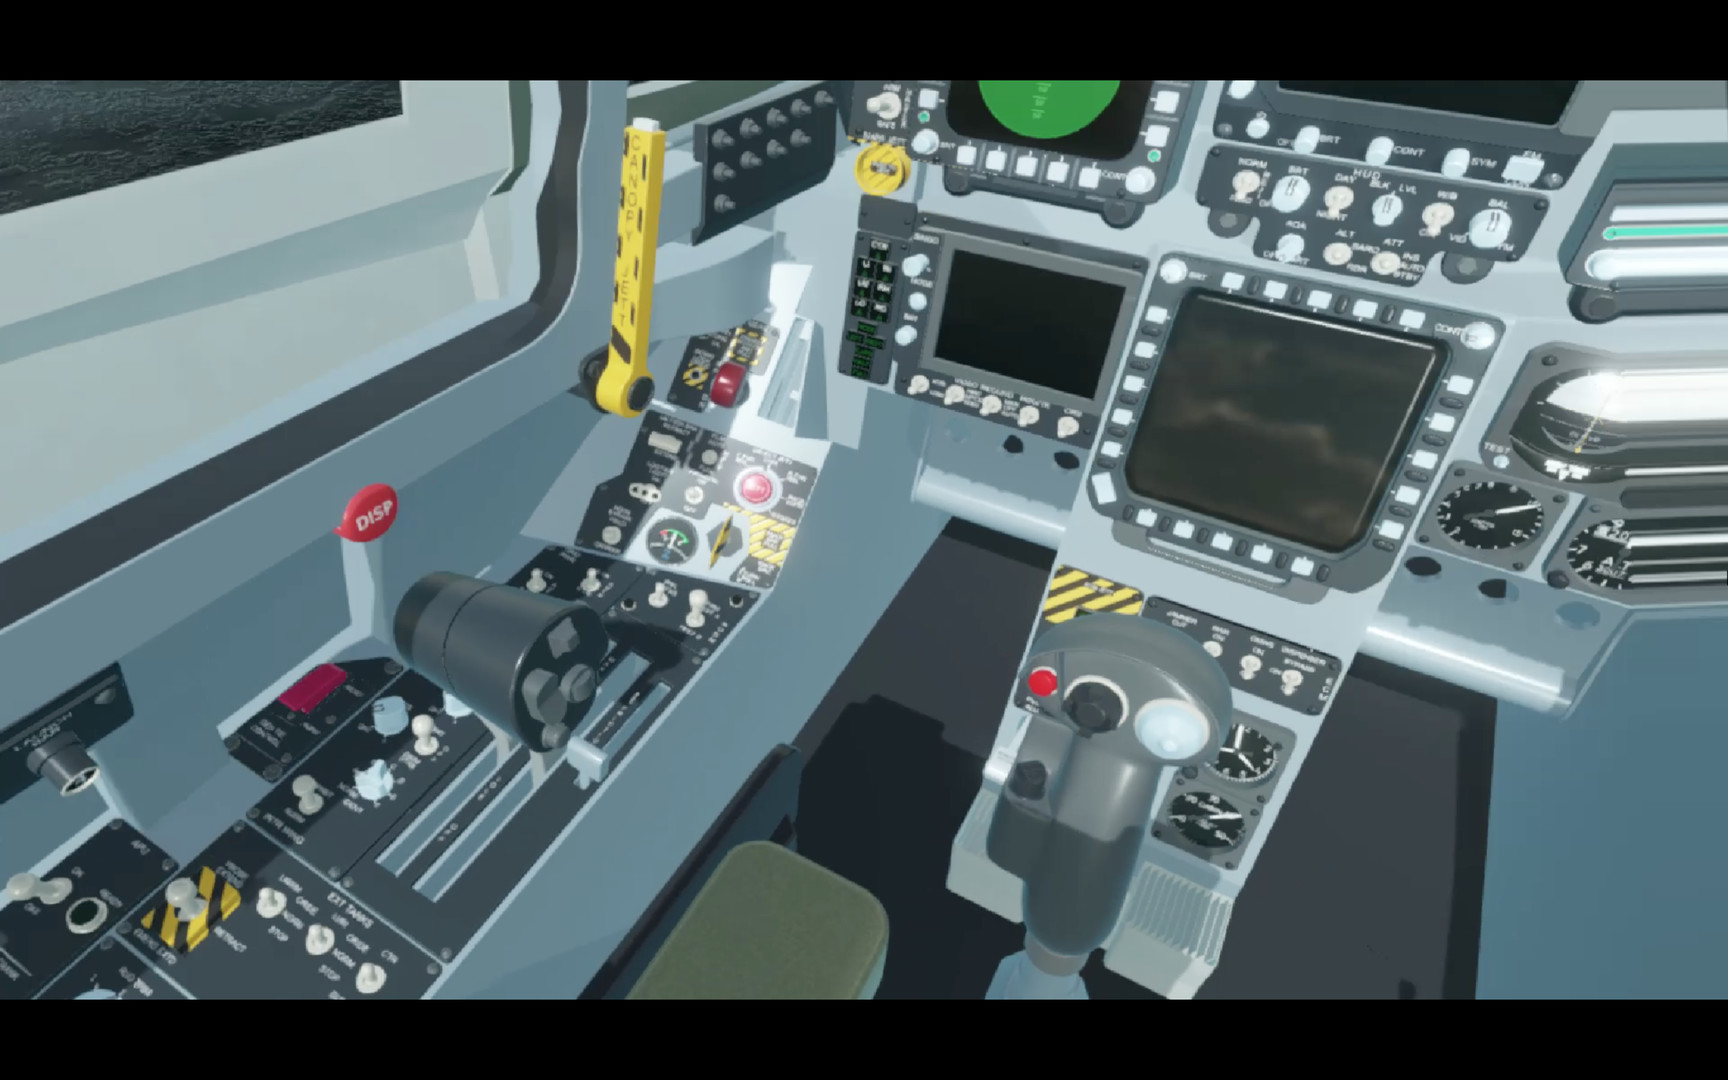 Flying Aces - Navy Pilot Simulator Free Download